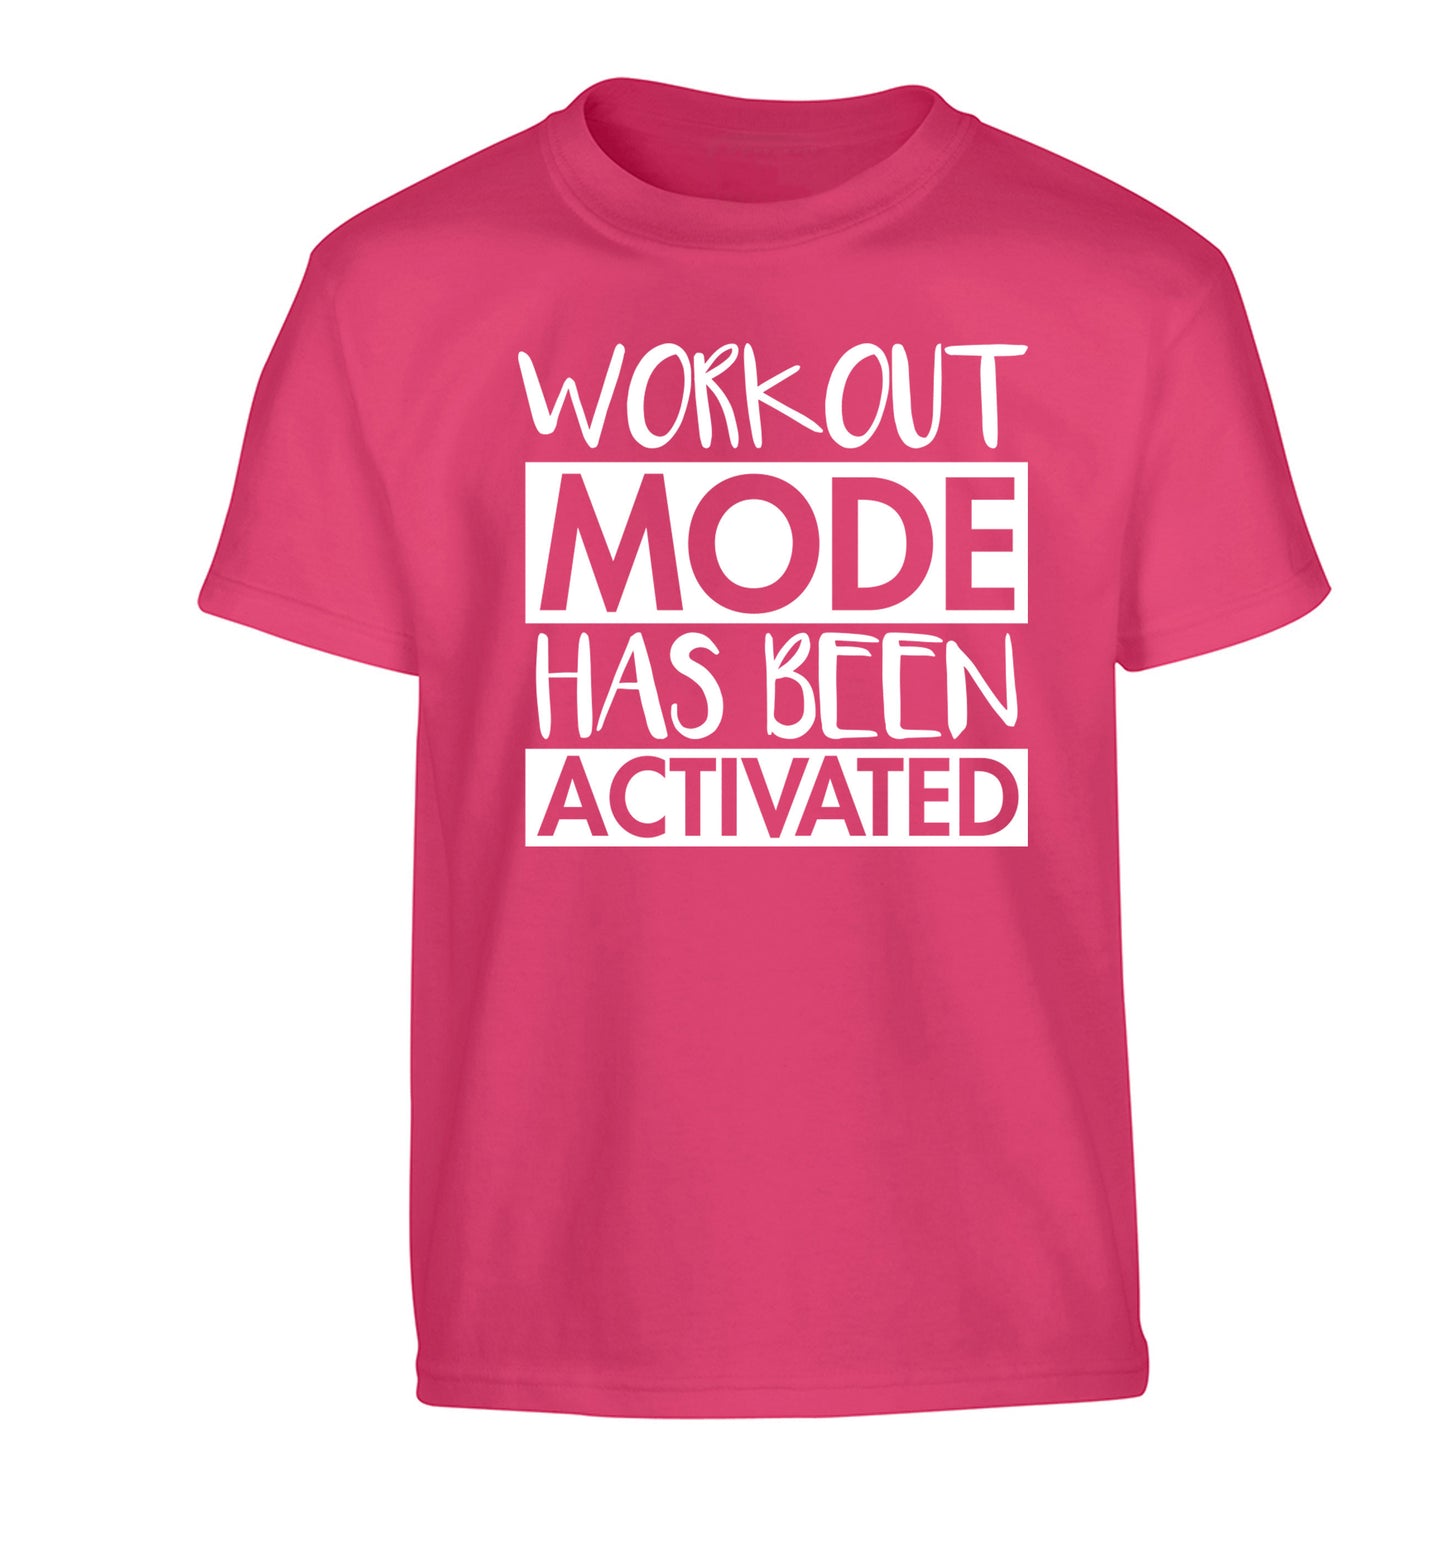 Workout mode has been activated Children's pink Tshirt 12-14 Years